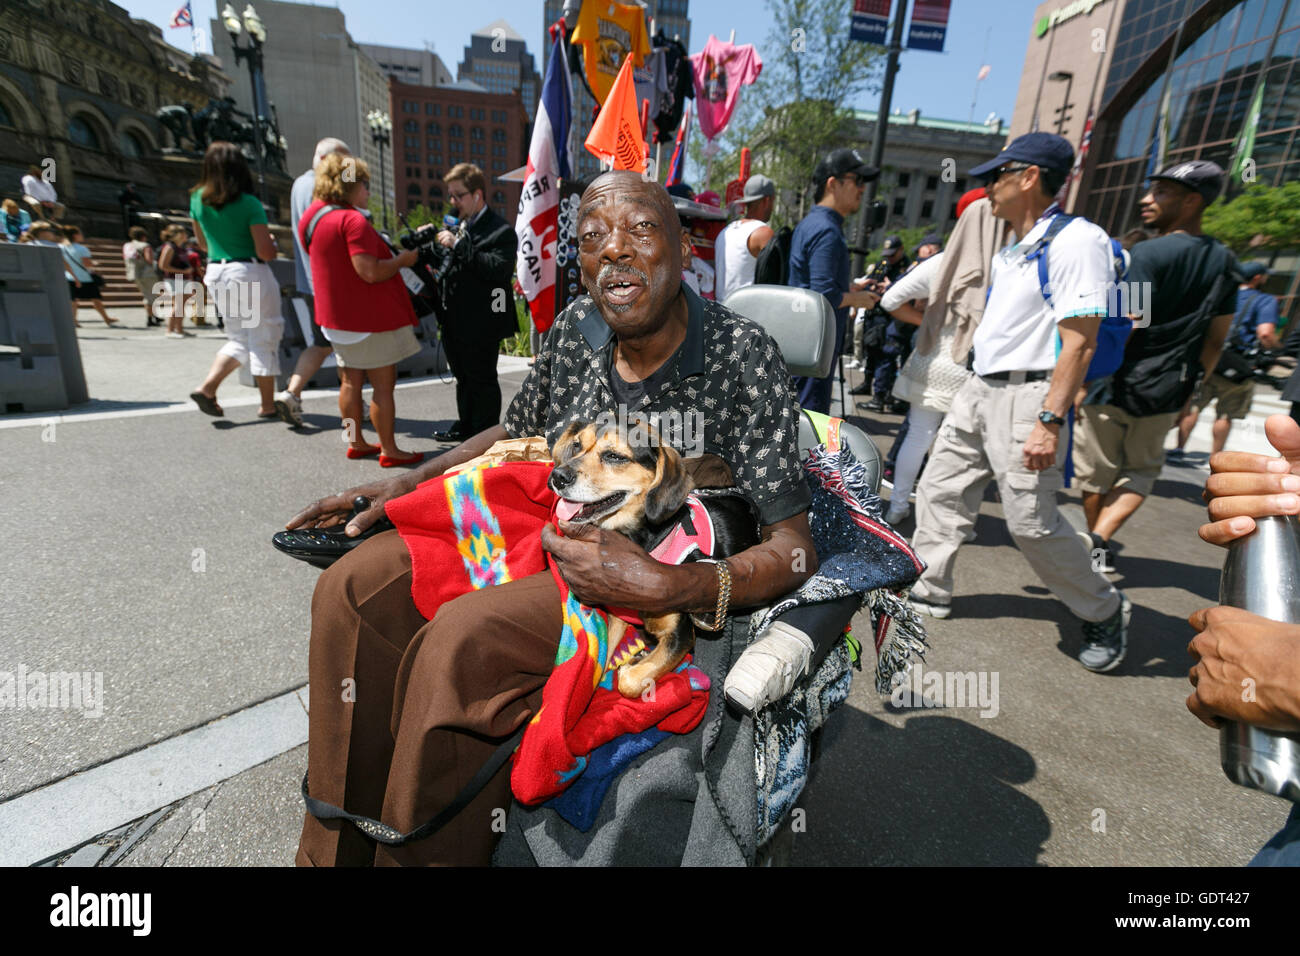 Cleveland, Ohio, USA. 20th July, 2016. A man from nearby Shaker Heights came down to Public Square in Cleveland to check out the scene around the Republican National Convention. Credit:  John Orvis/Alamy Live News Stock Photo